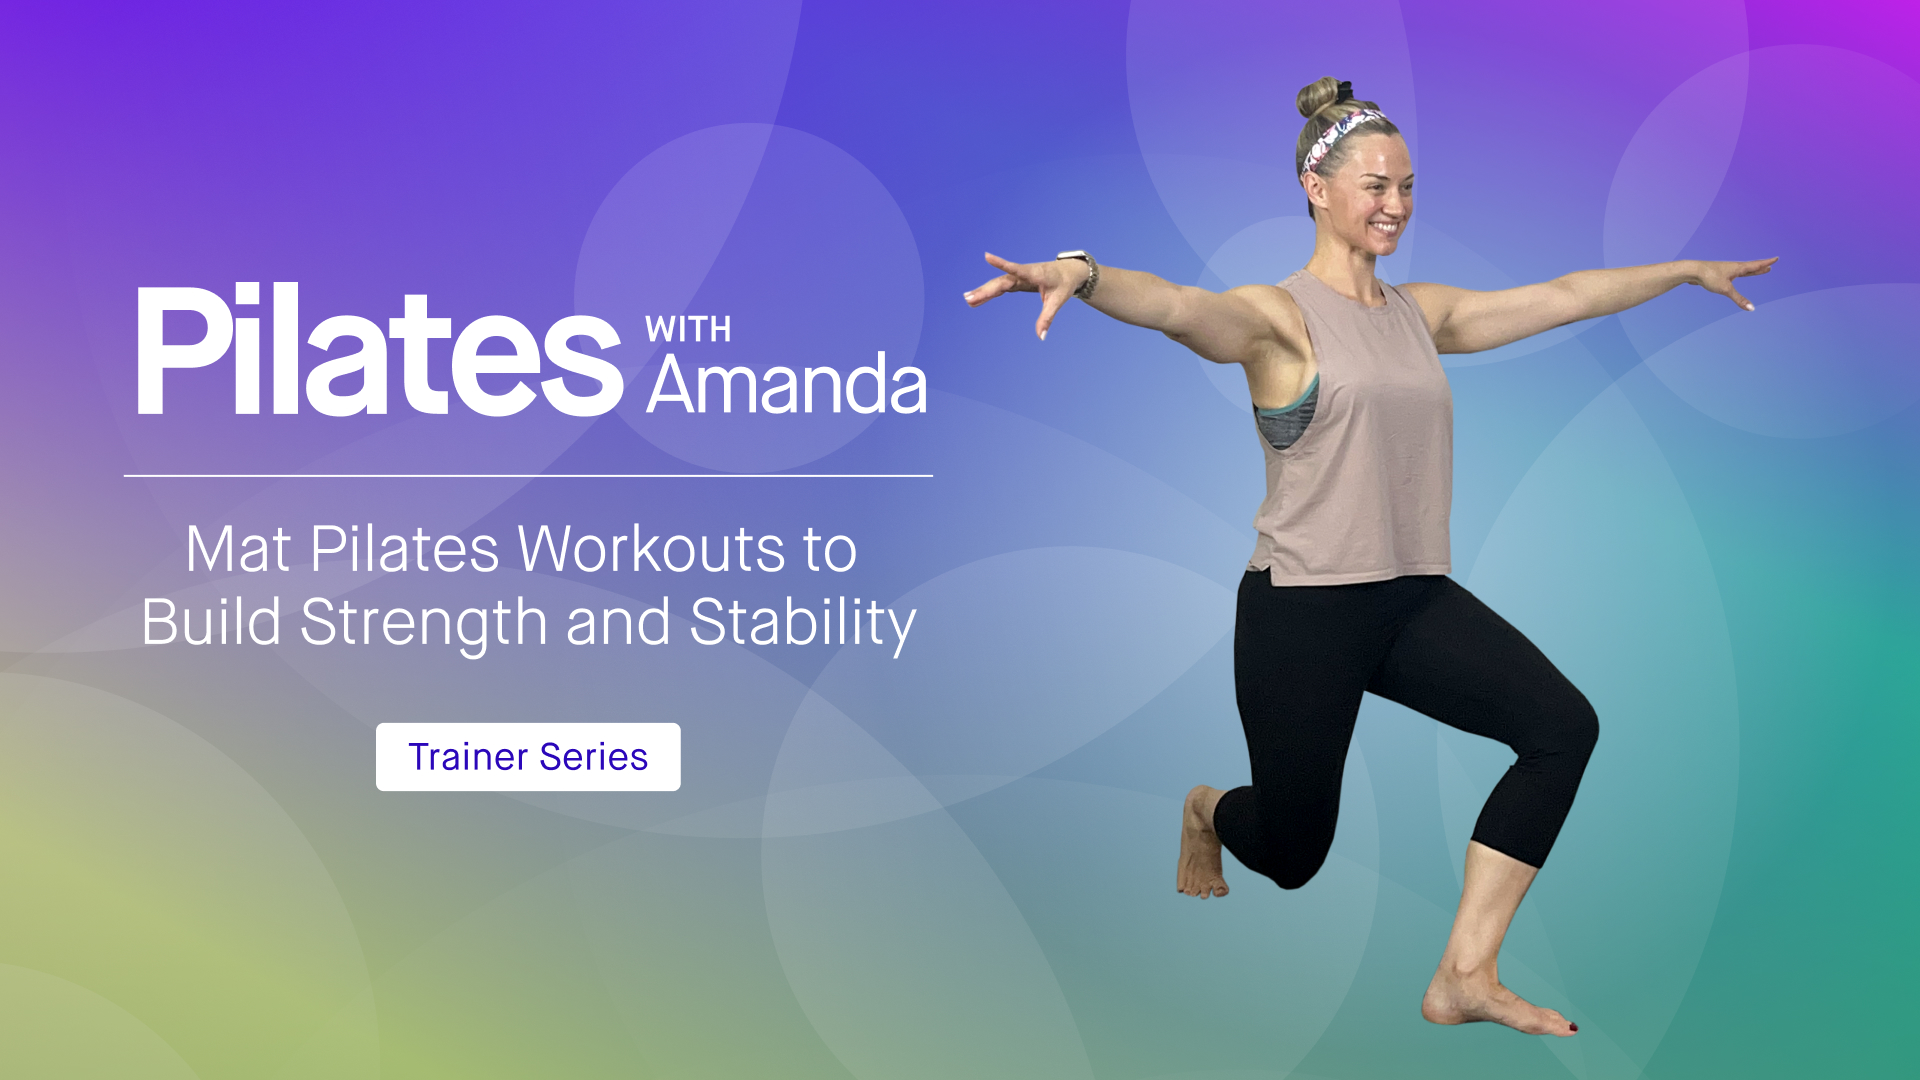 5 Day Challenge Trainer Series: Pilates with Amanda Total Body Mat Pilates  Workouts to Build Strength and Stability